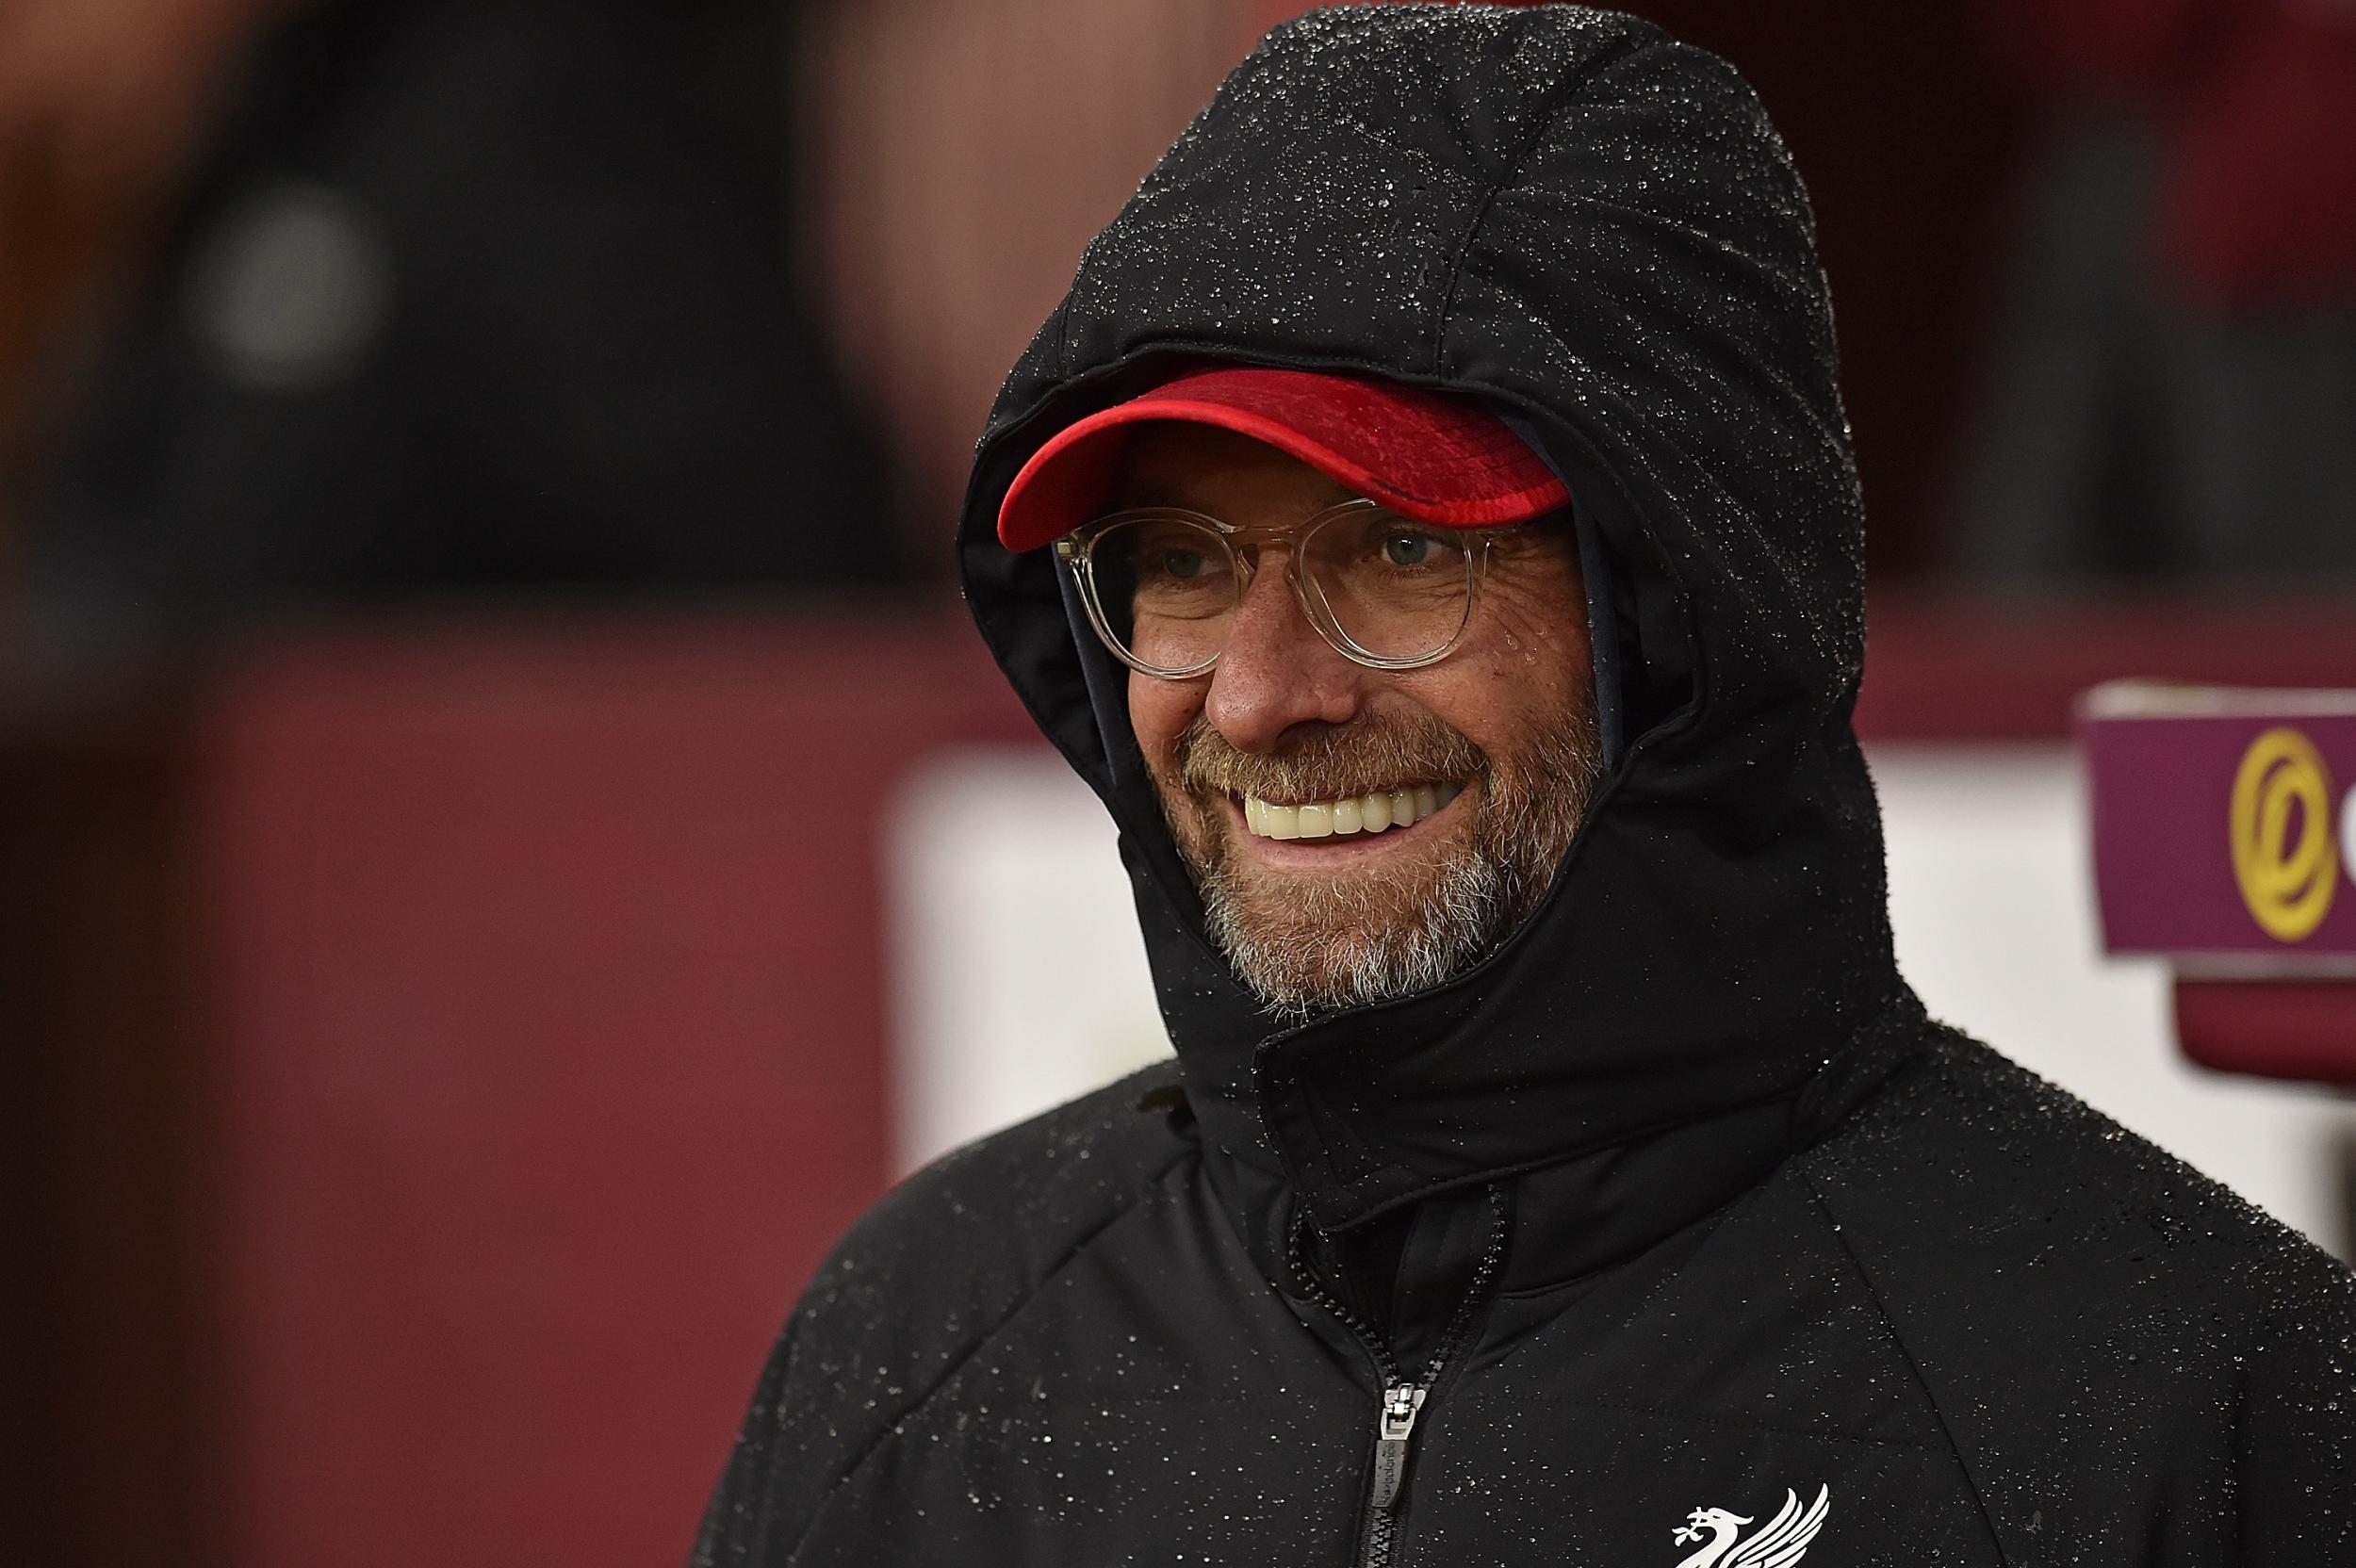 Jurgen Klopp admitted his new defender is desperate to play